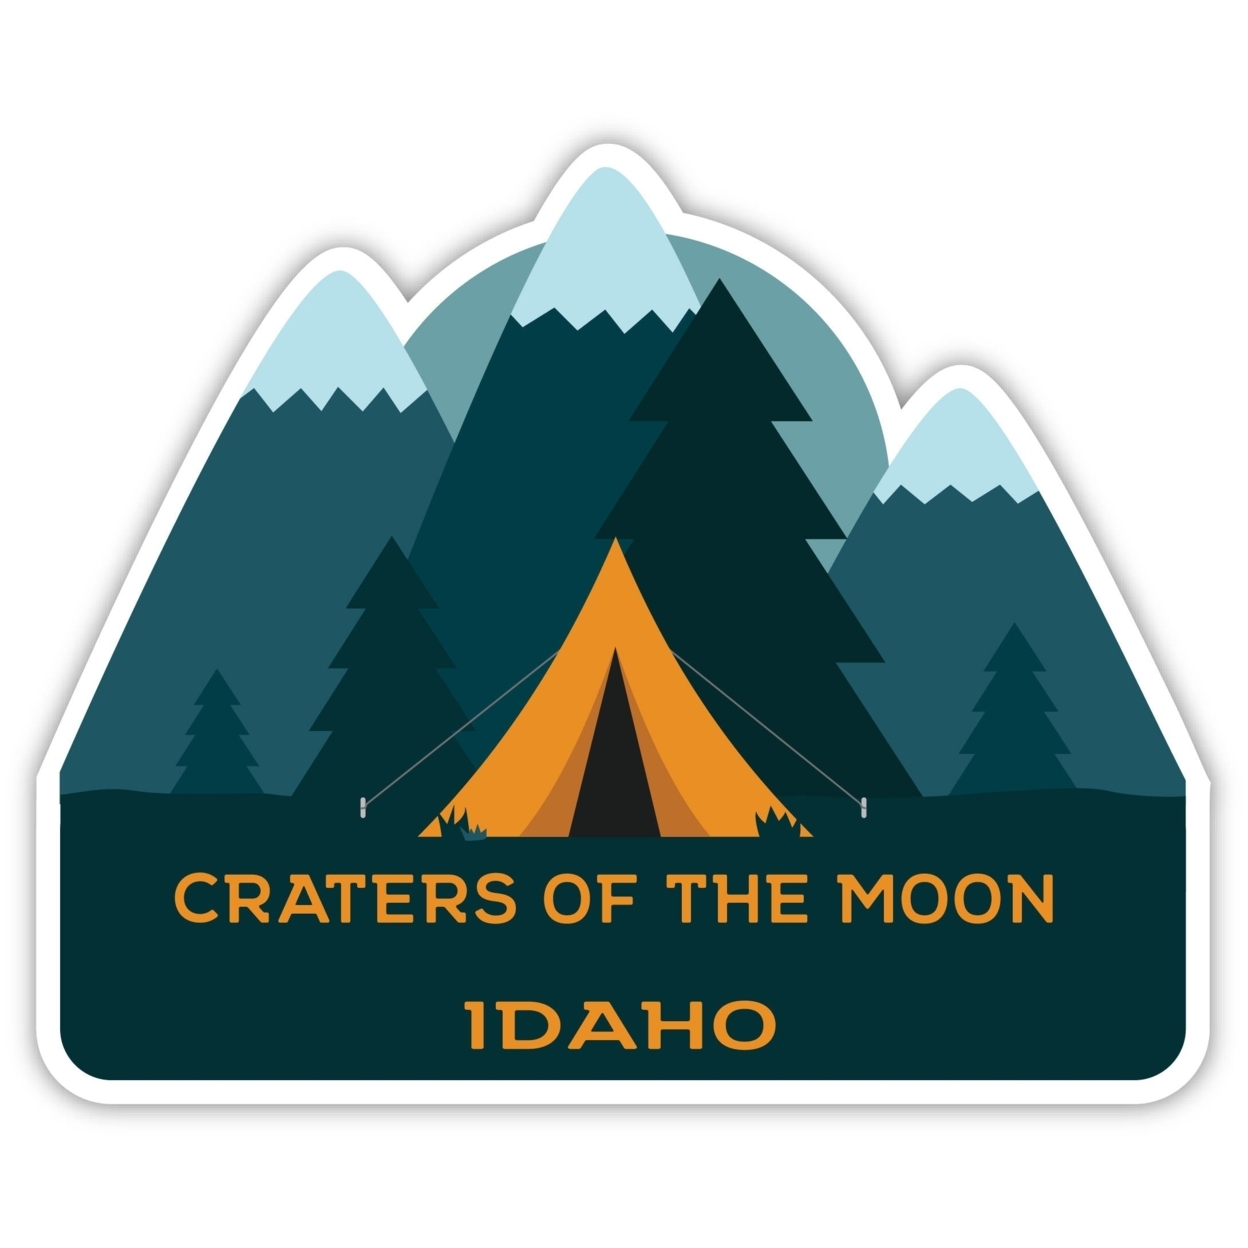 Craters Of The Moon Idaho Souvenir Decorative Stickers (Choose Theme And Size) - 4-Pack, 8-Inch, Tent